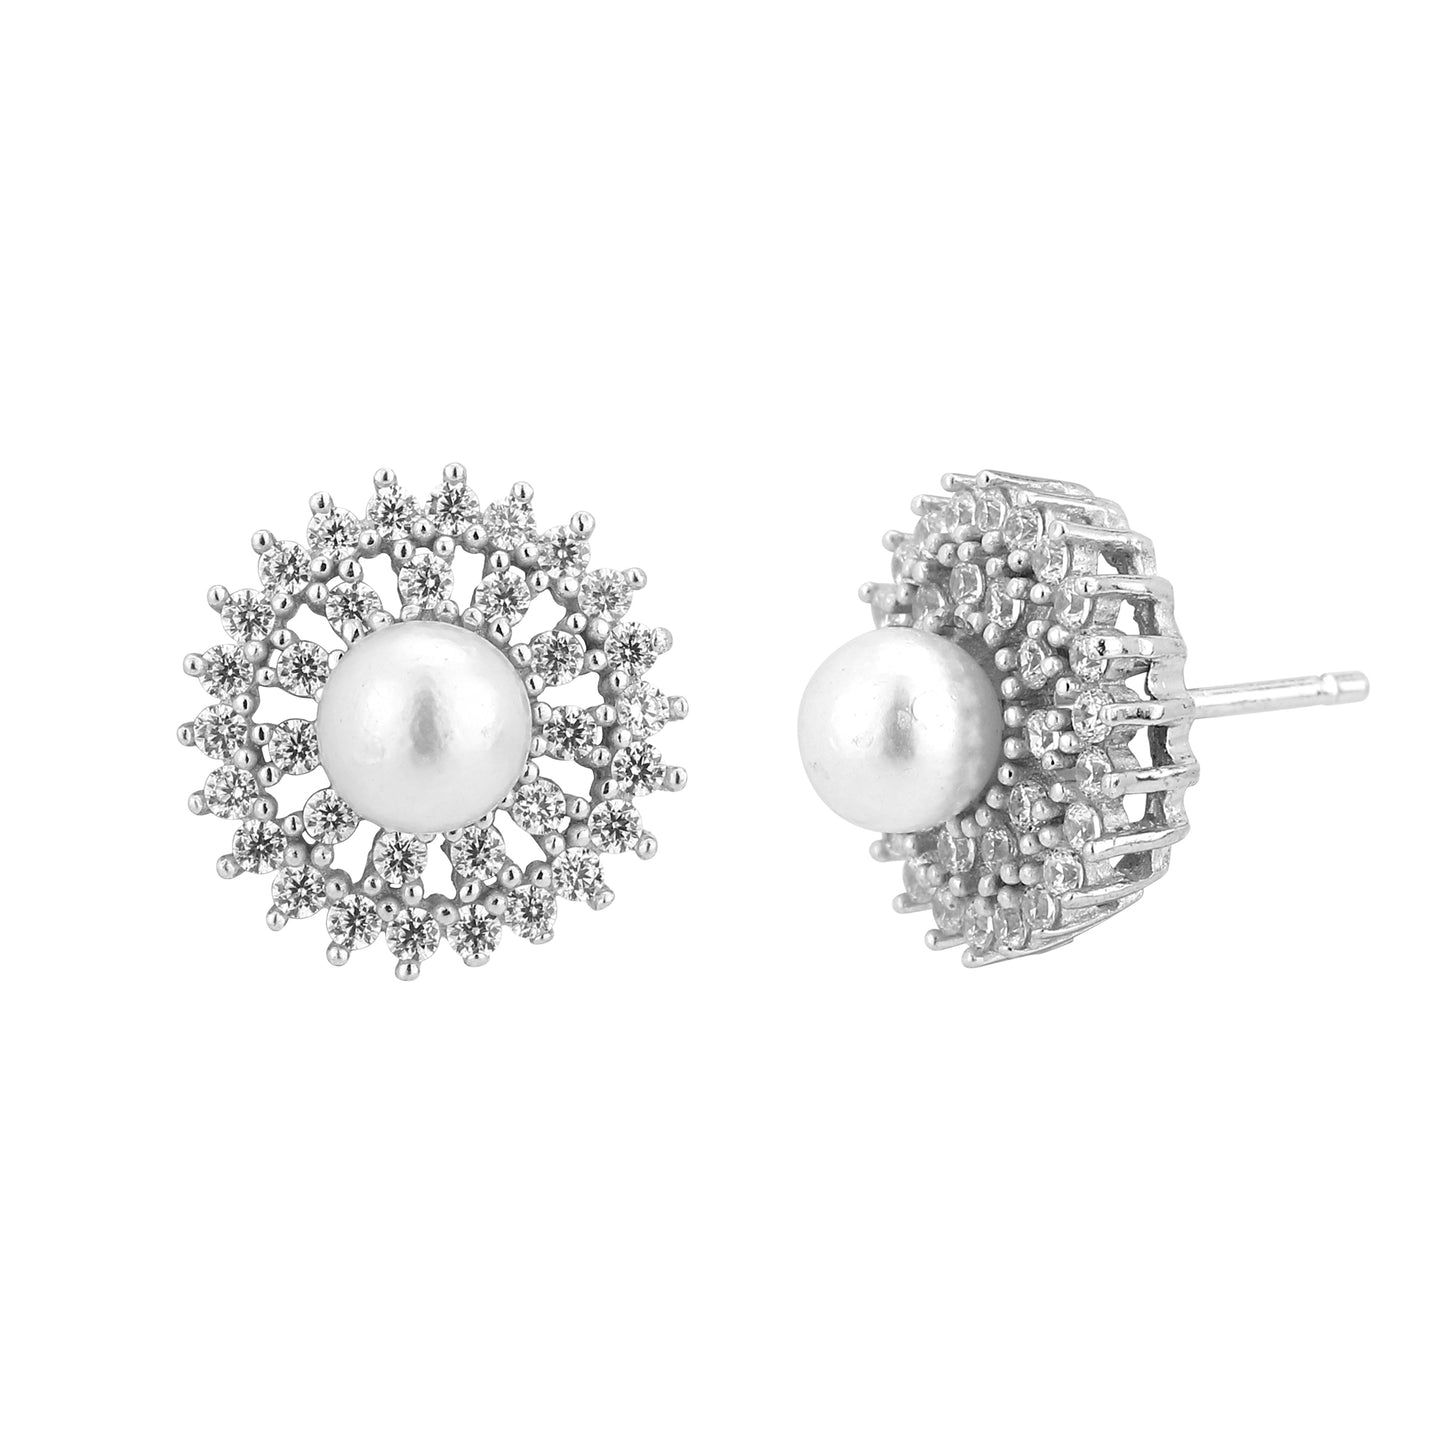 Carlton London White Studded Circular Jacket with Centre Bead Stud Earrings